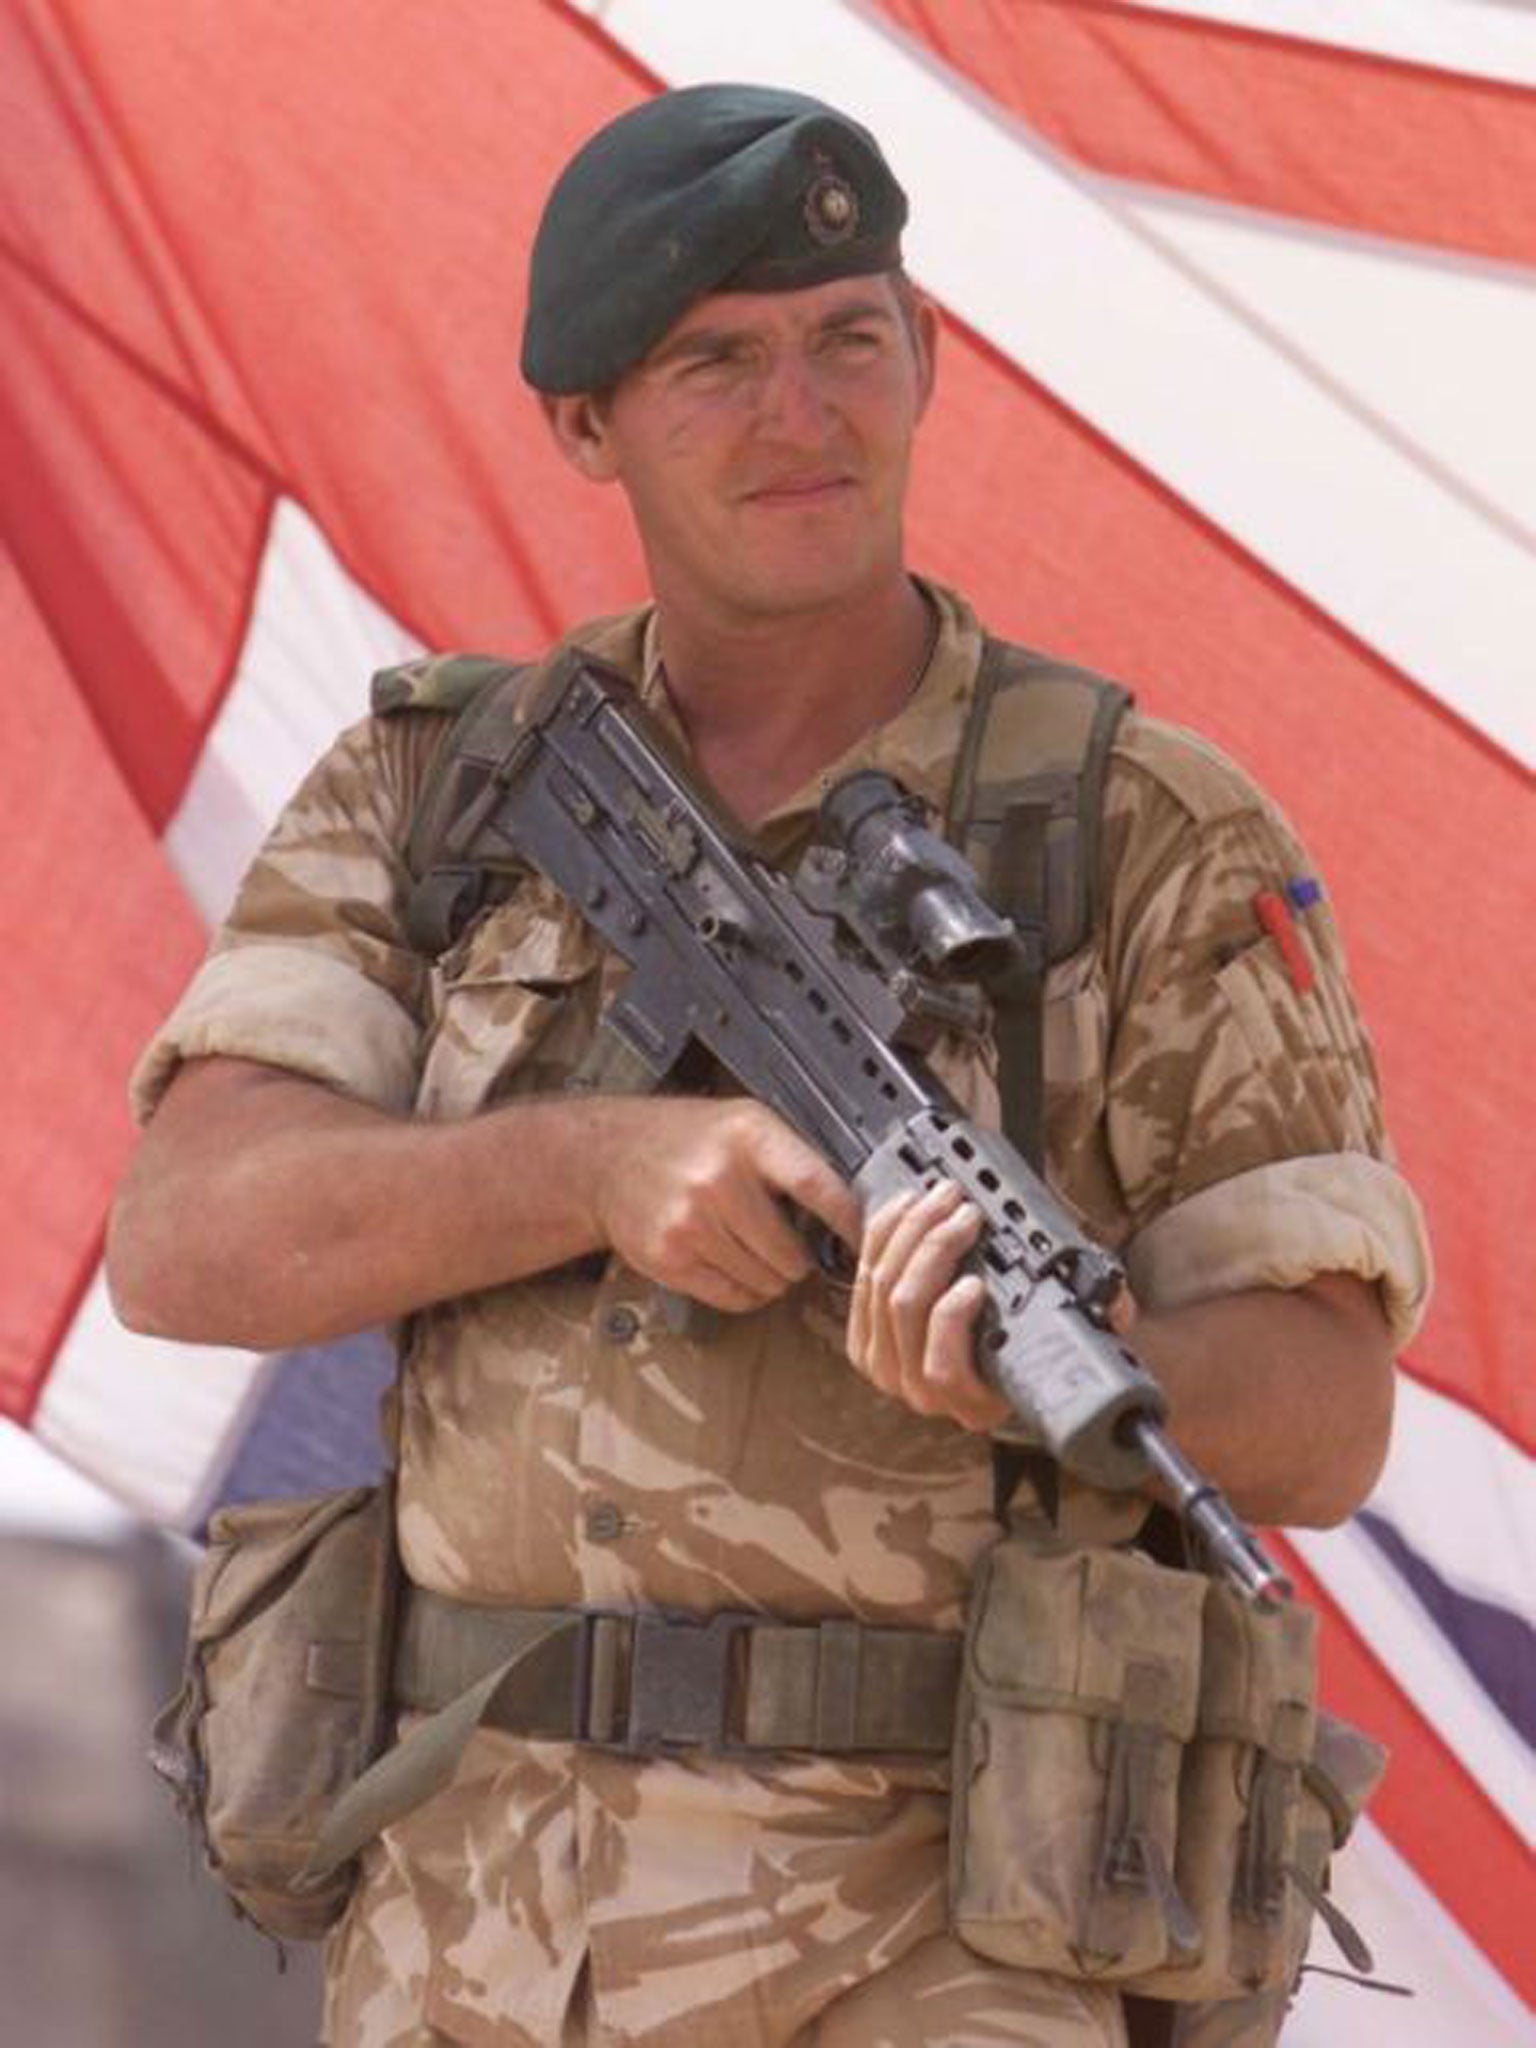 Alexander Blackman was handed a life sentence after being convicted for the murder of an Afghan insurgent